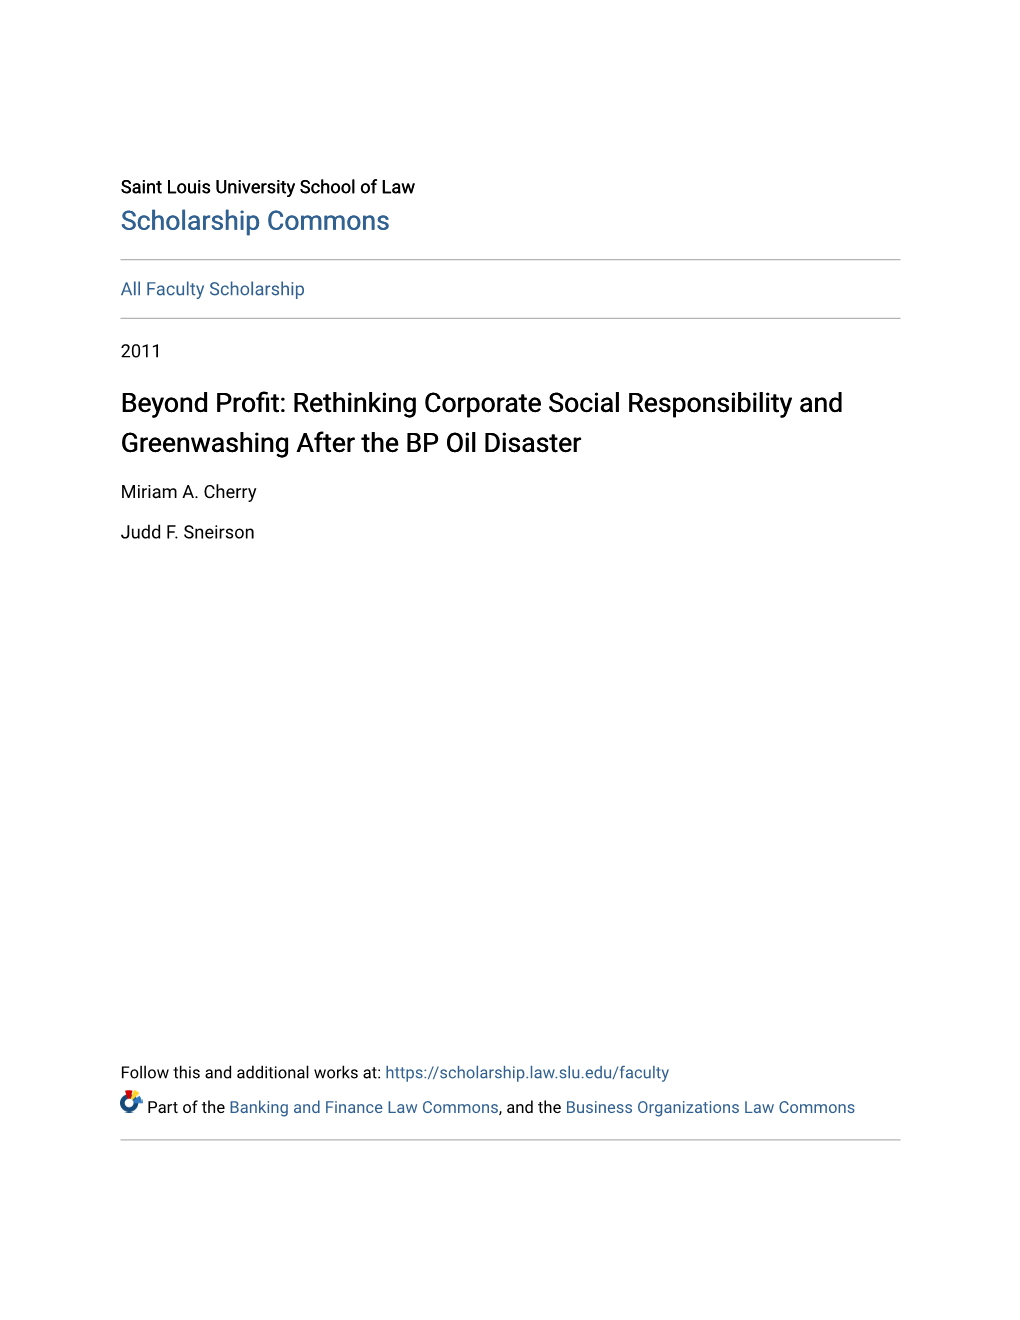 Rethinking Corporate Social Responsibility and Greenwashing After the BP Oil Disaster